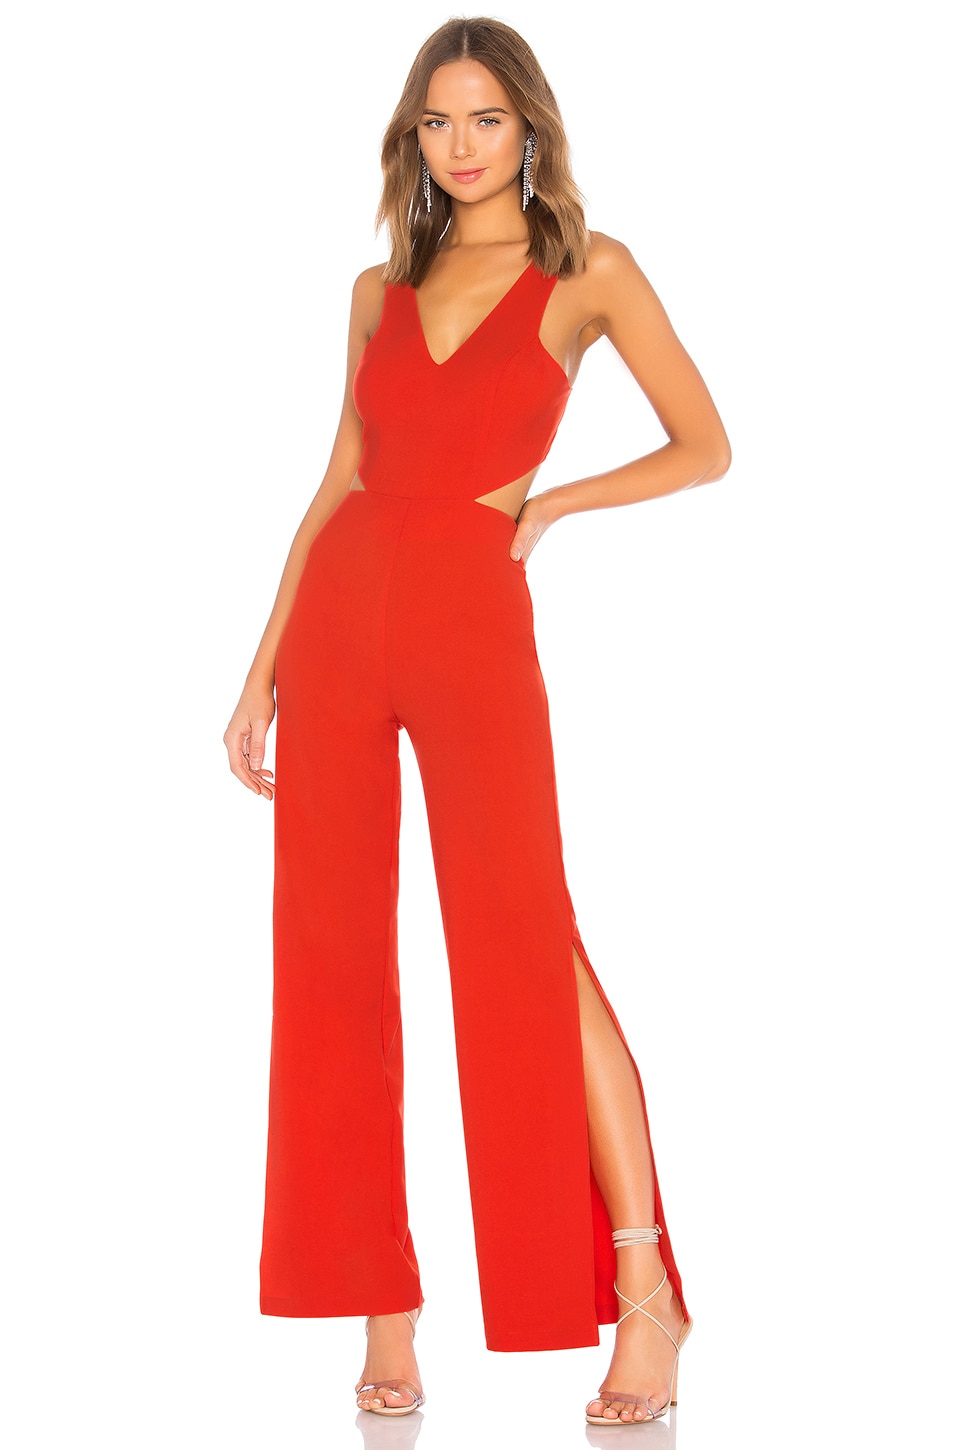 NBD x NAVEN Tiffany Jumpsuit in Neon Red | REVOLVE